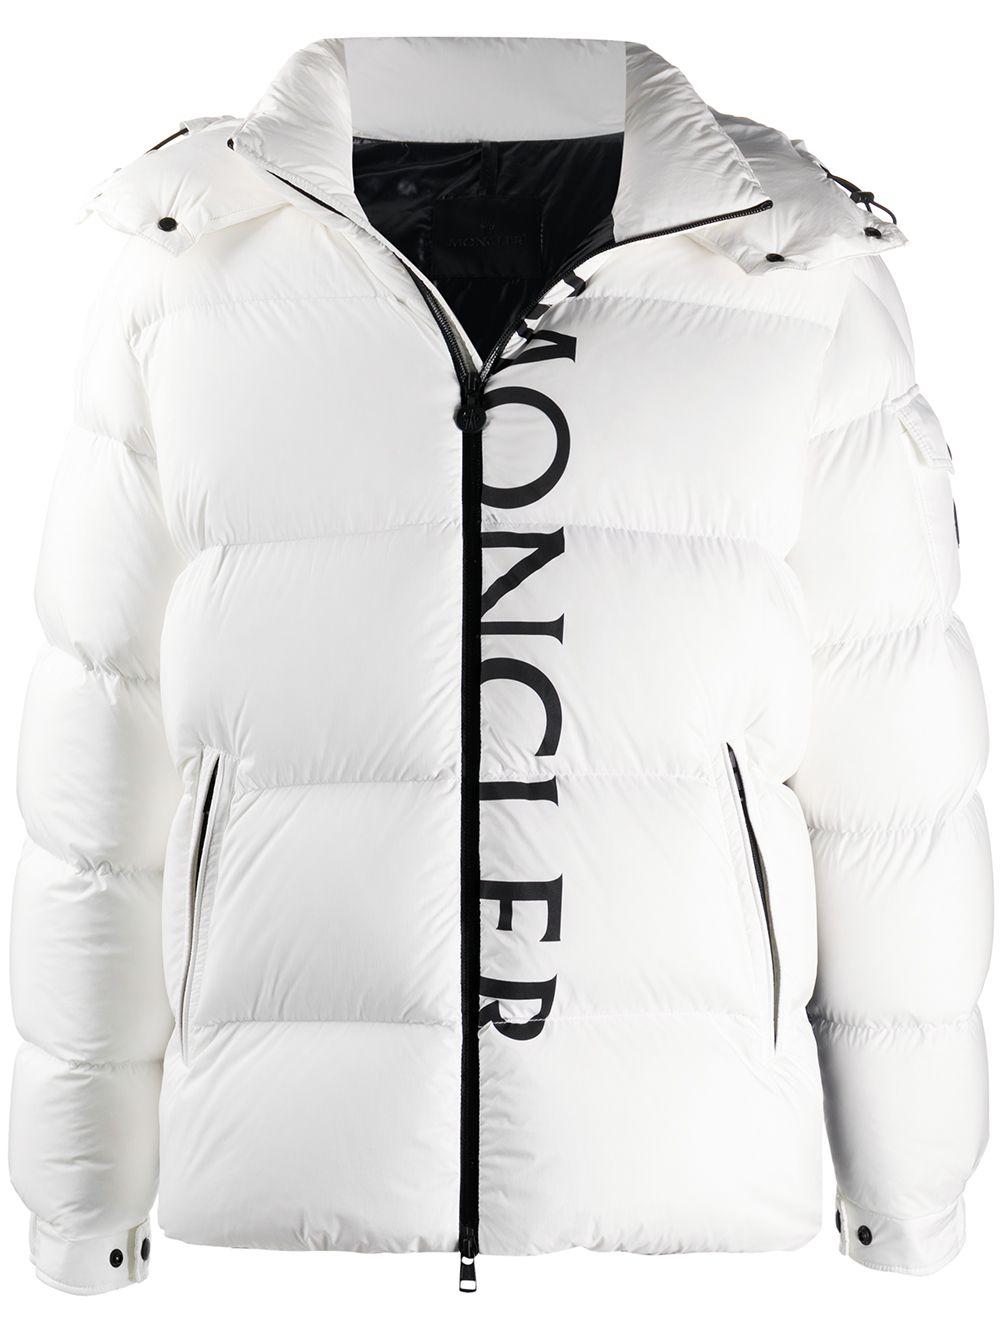 All White Moncler Jacket | tunersread.com